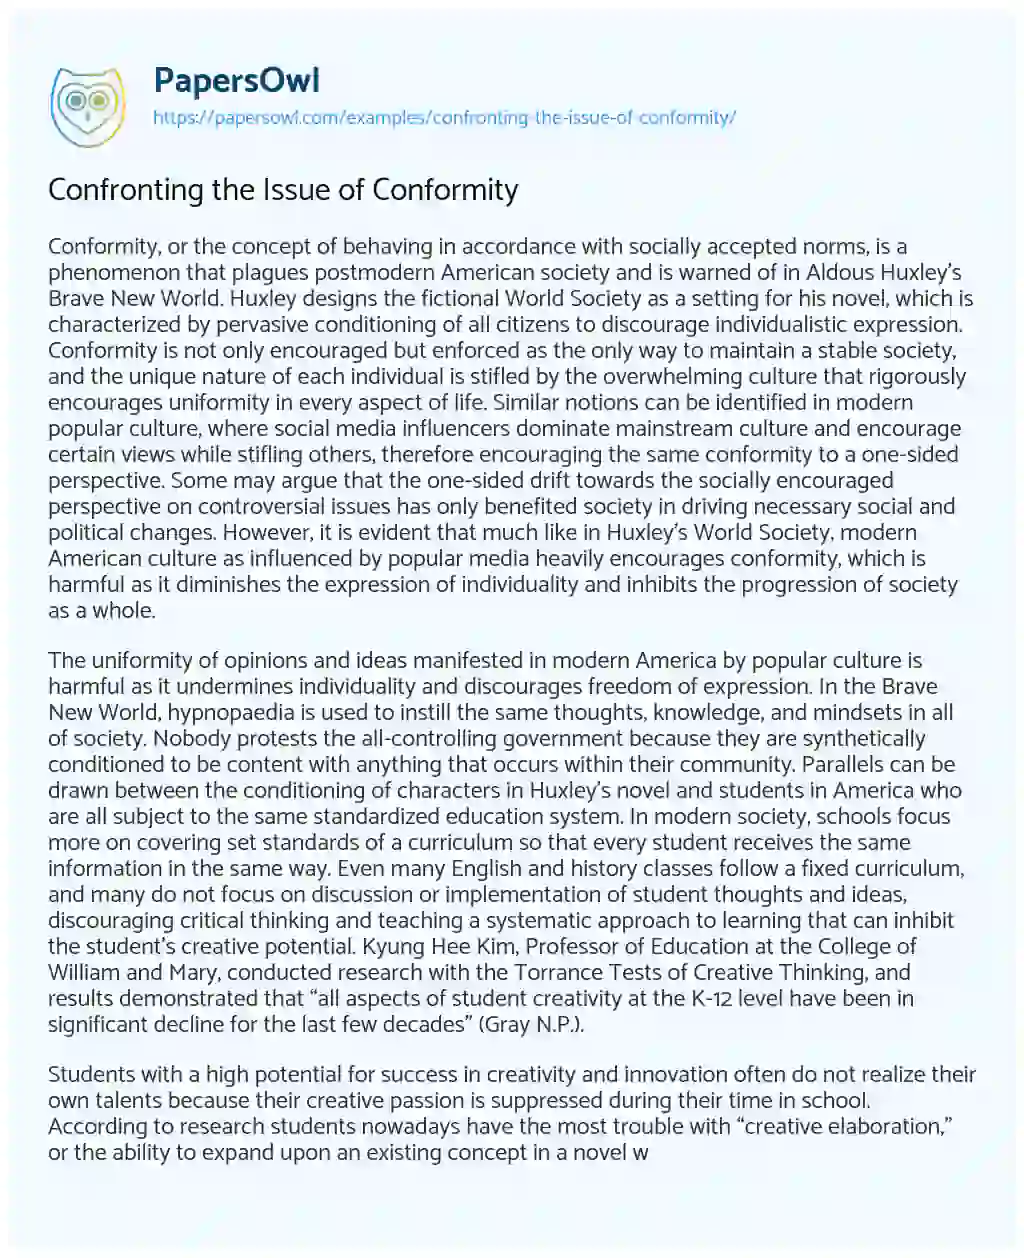 Confronting the Issue of Conformity essay